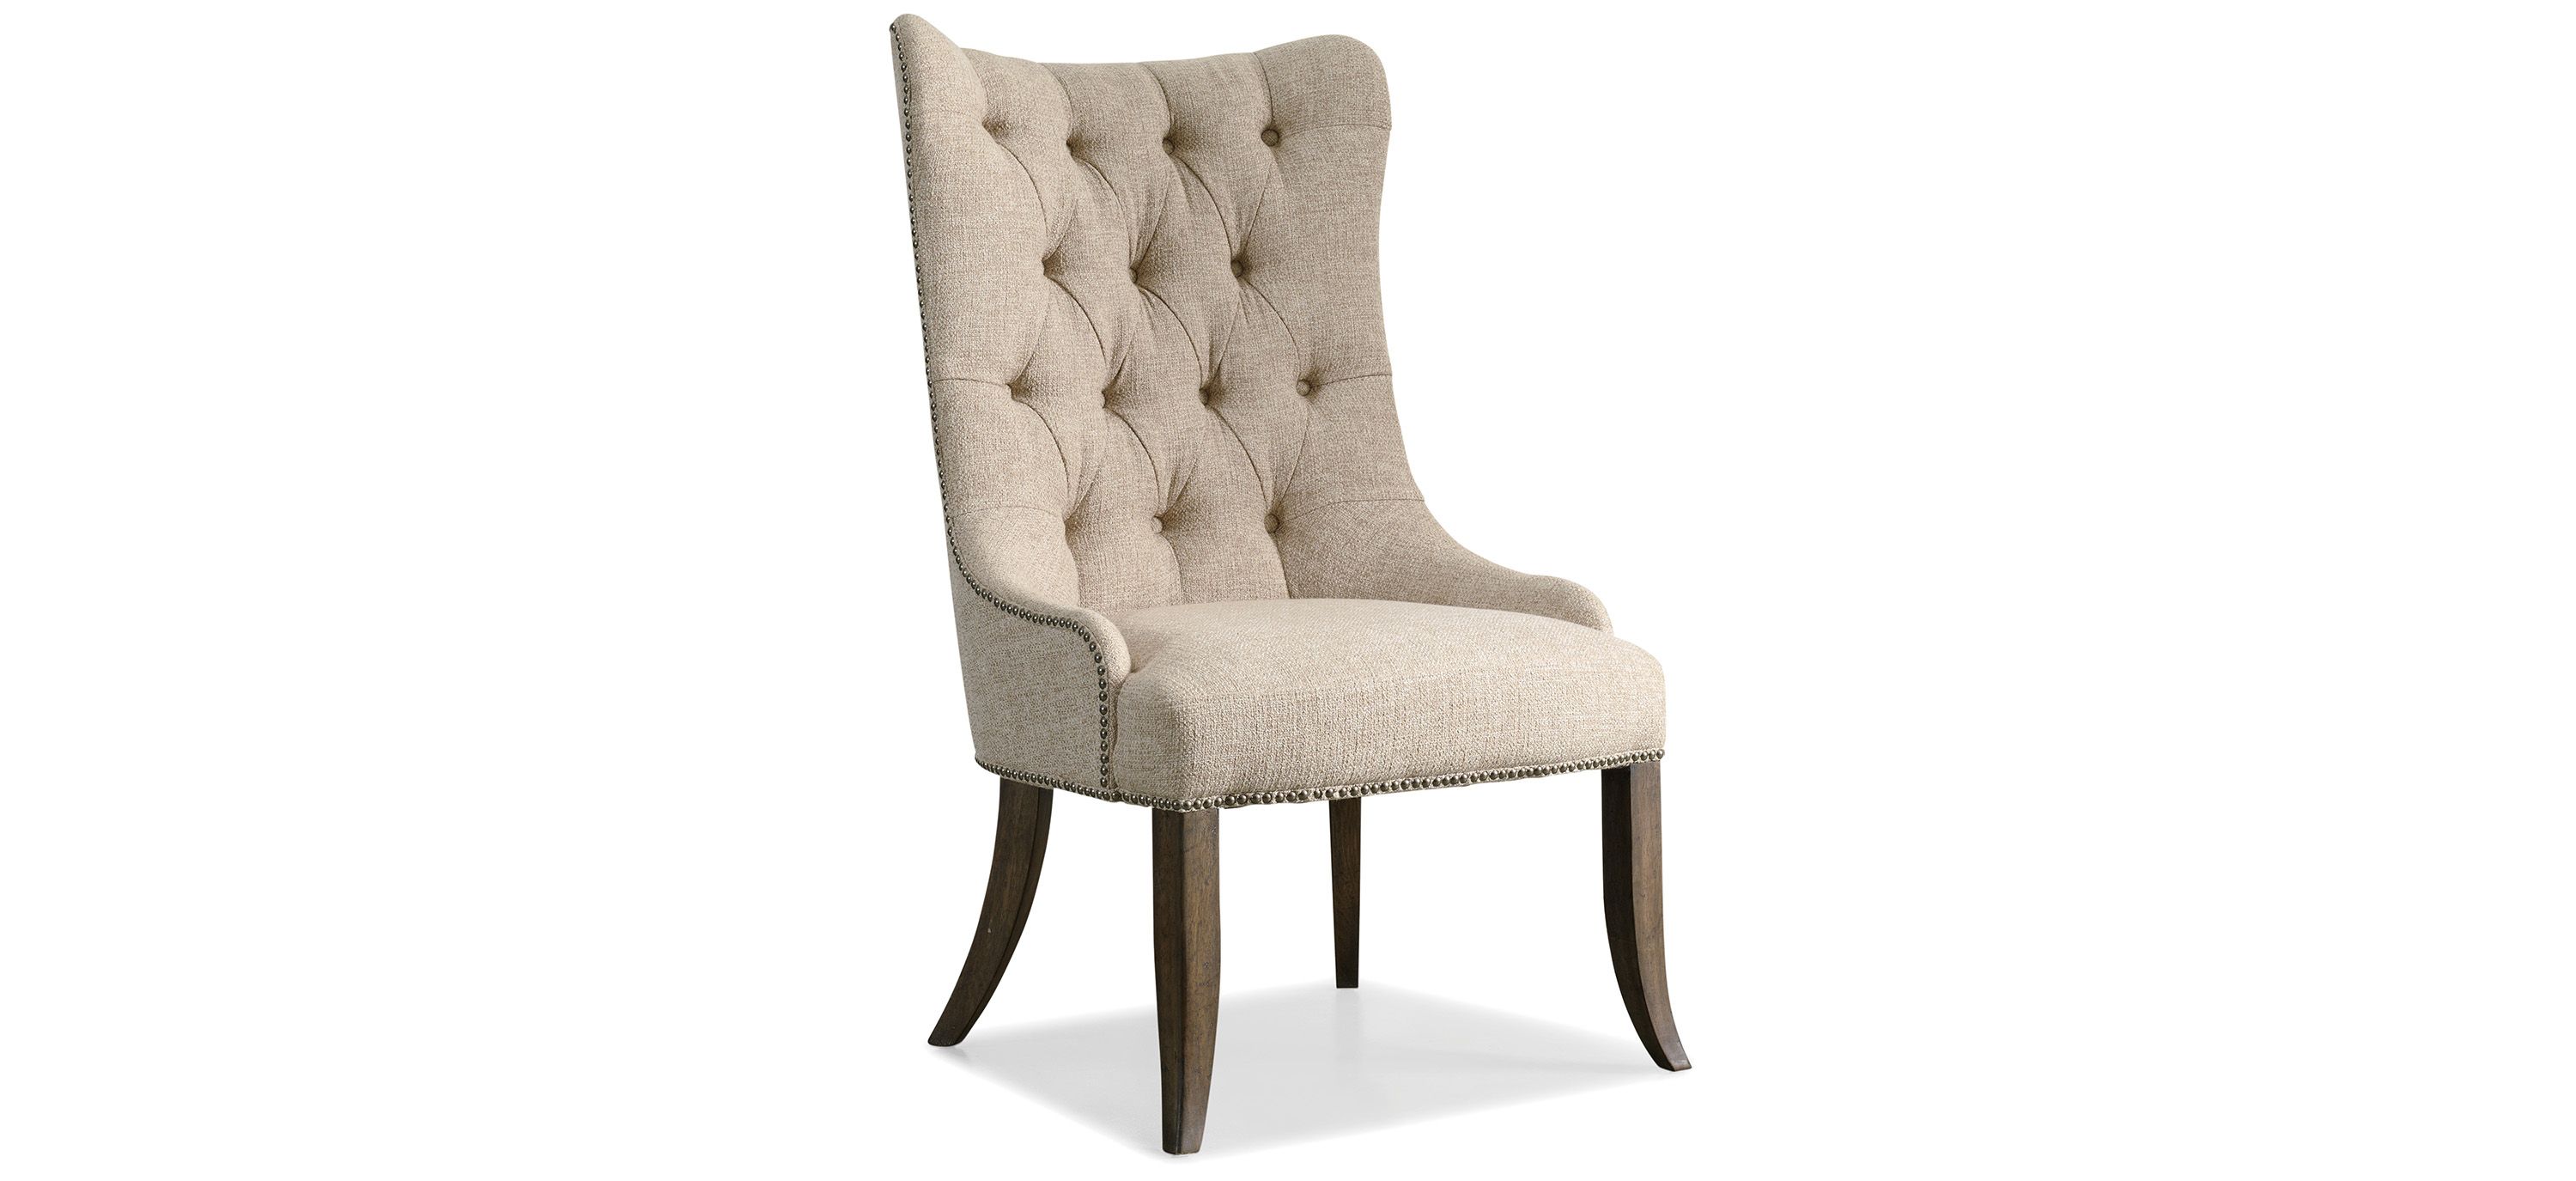 Rhapsody Tufted Dining Chair - Set of 2